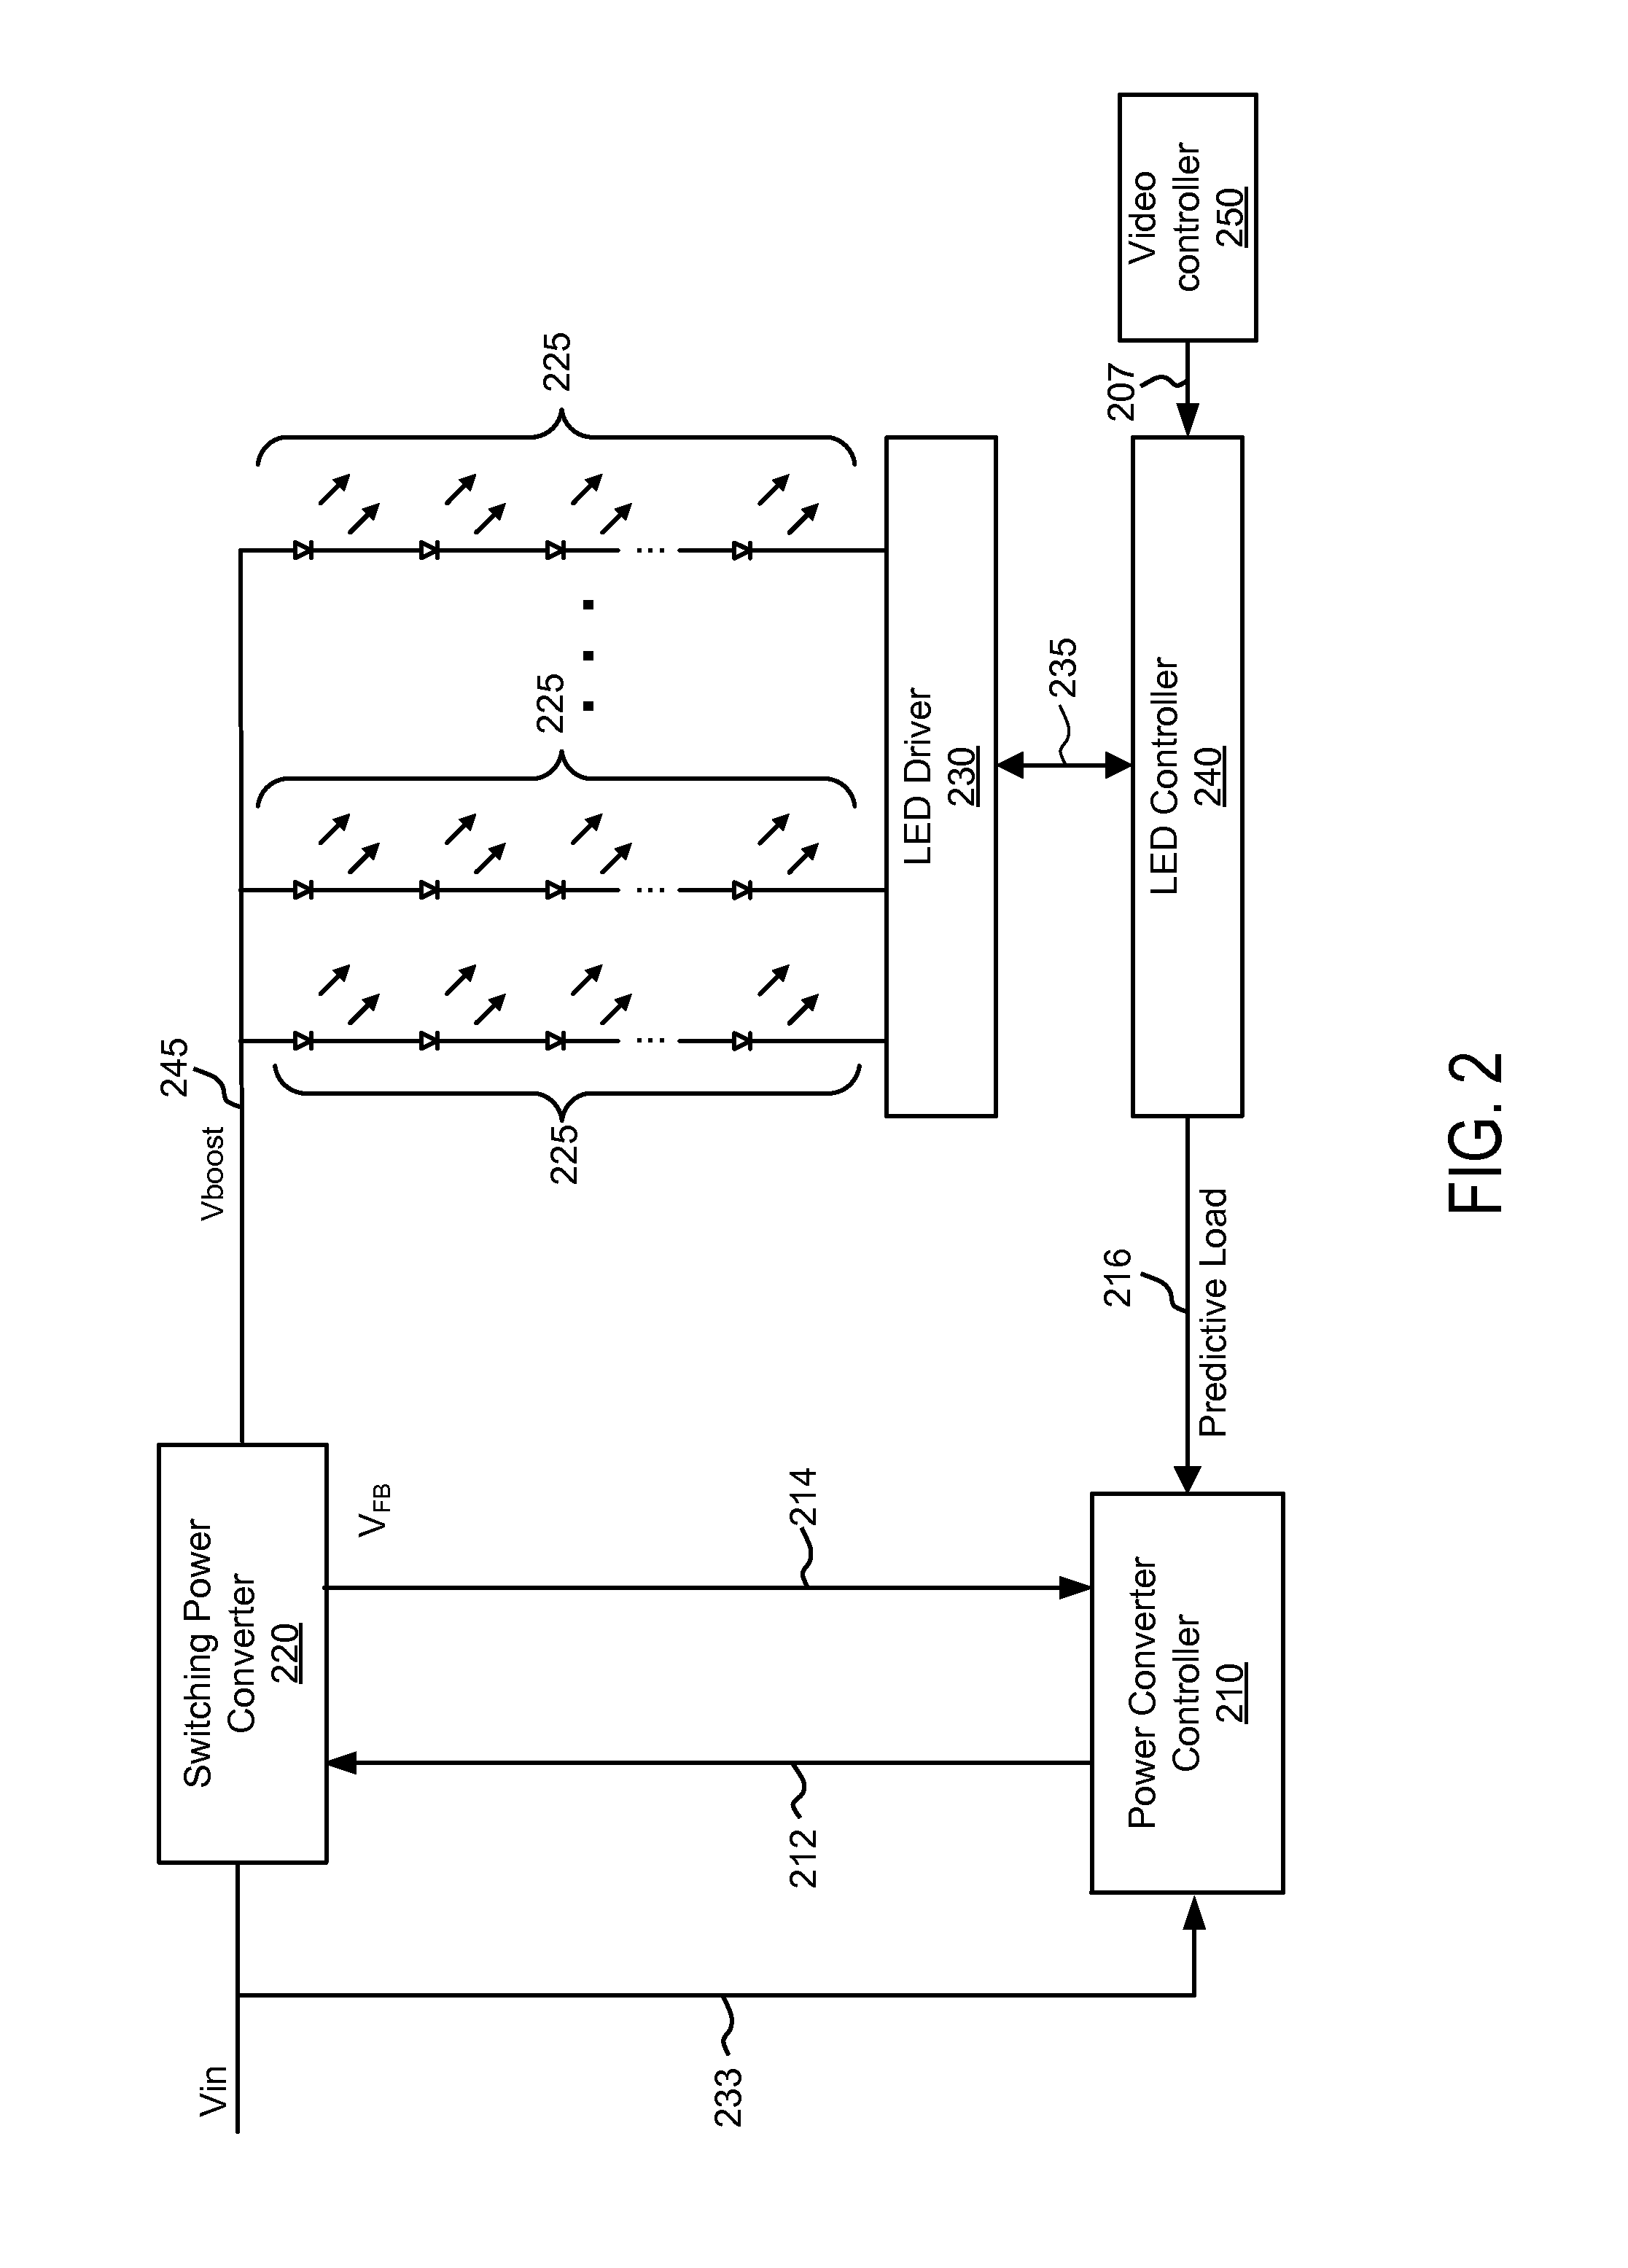 Predictive control of power converter for LED driver